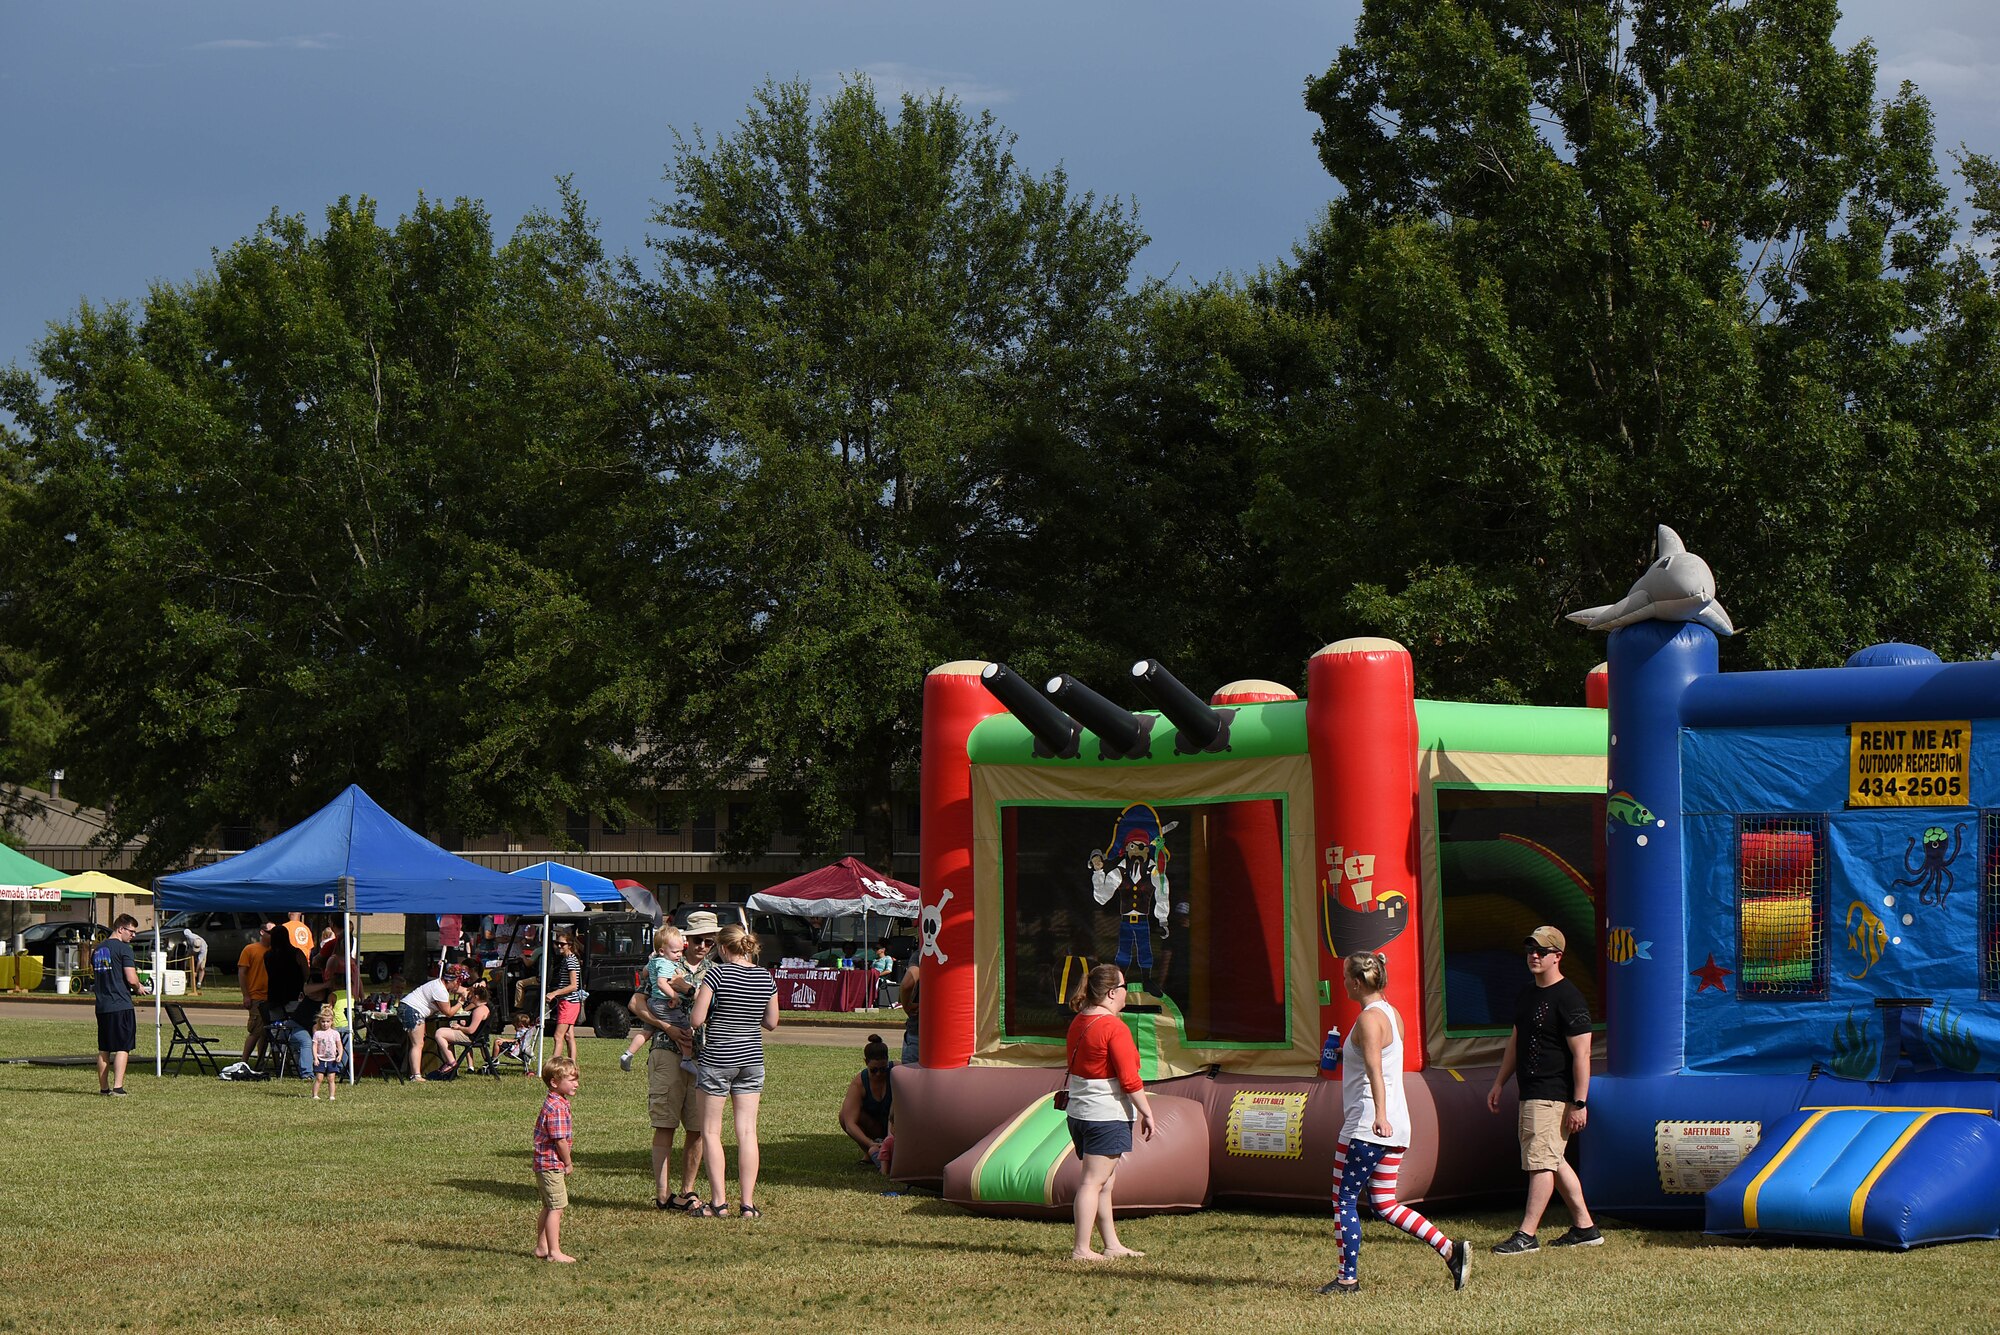 Attendees visit various attractions during BLAZE Fest July 3, 2019, on Columbus Air Force Base, Miss. The festival had an assortment of food vendors, bouncy castles and mechanical rides for children, outdoor games and so much more. (U.S. Air Force photo by Senior Airman Keith Holcomb)